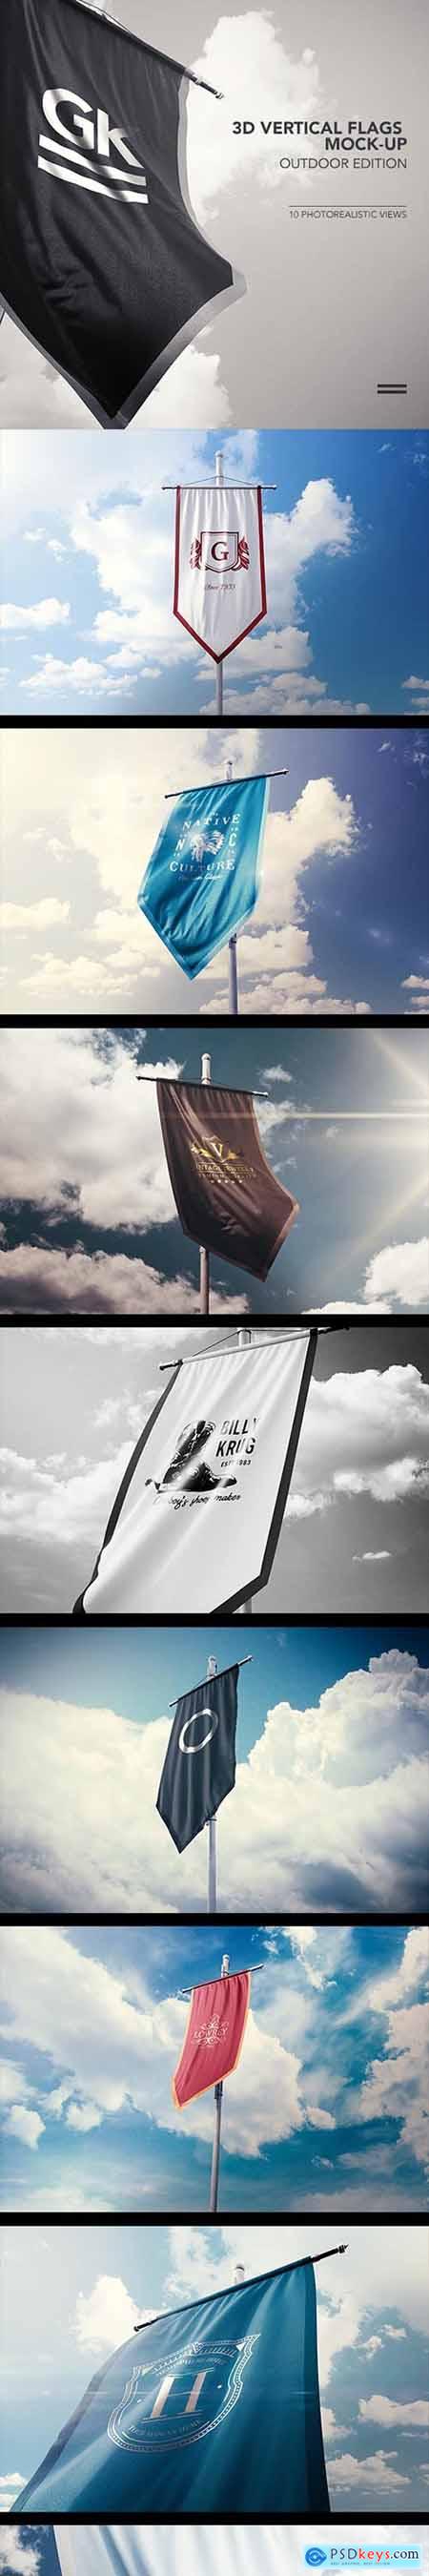 10 Realistic 3D Vertical Flags Mock-Up (Outdoor Edition) 17696460